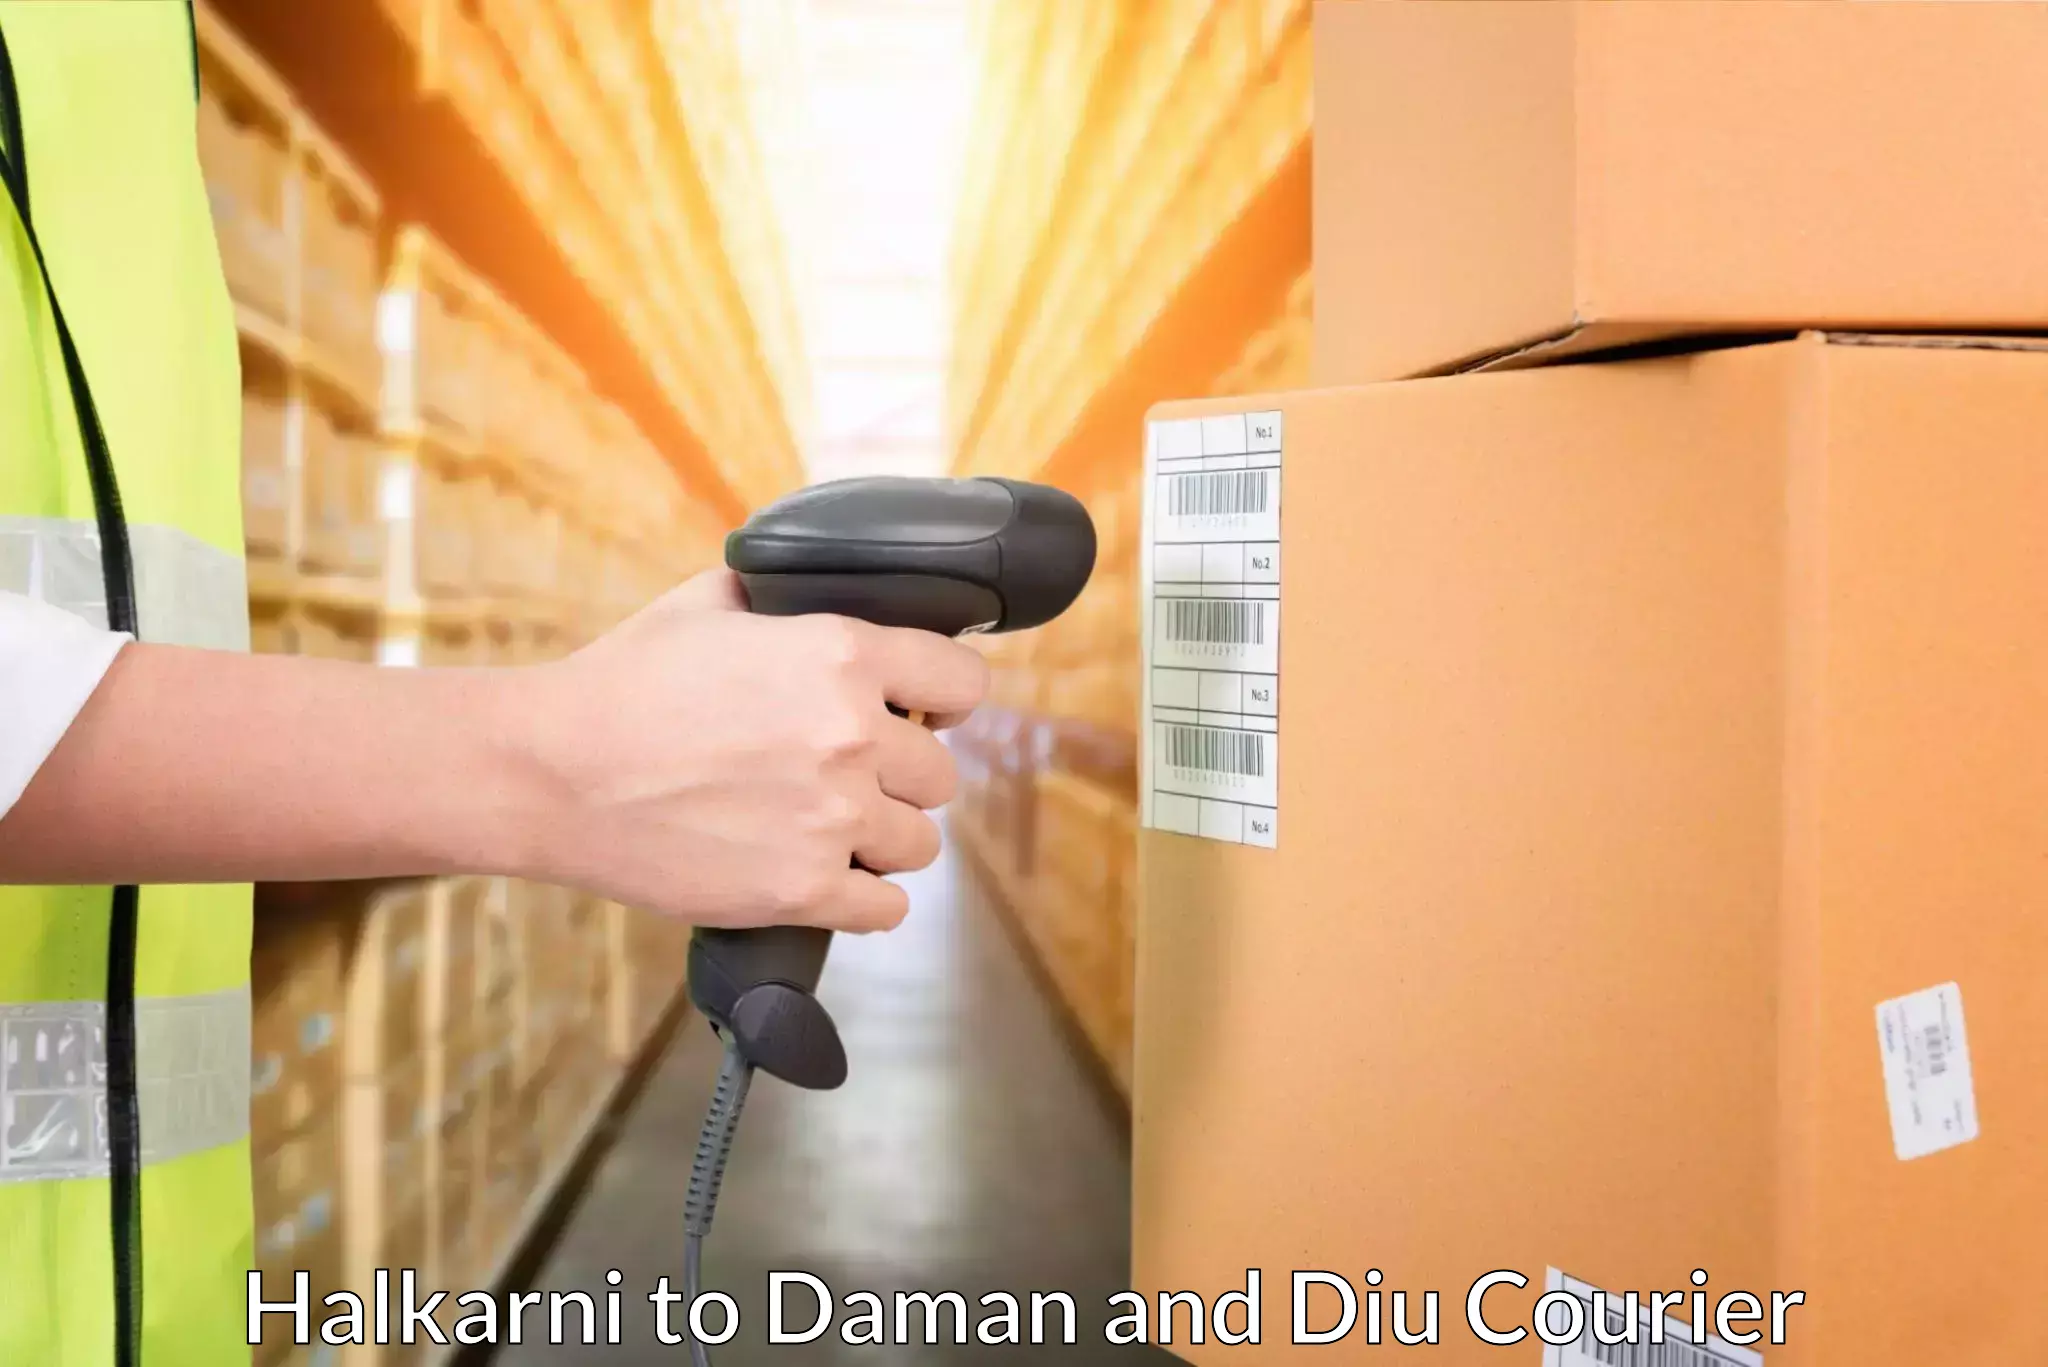 Automated parcel services Halkarni to Daman and Diu